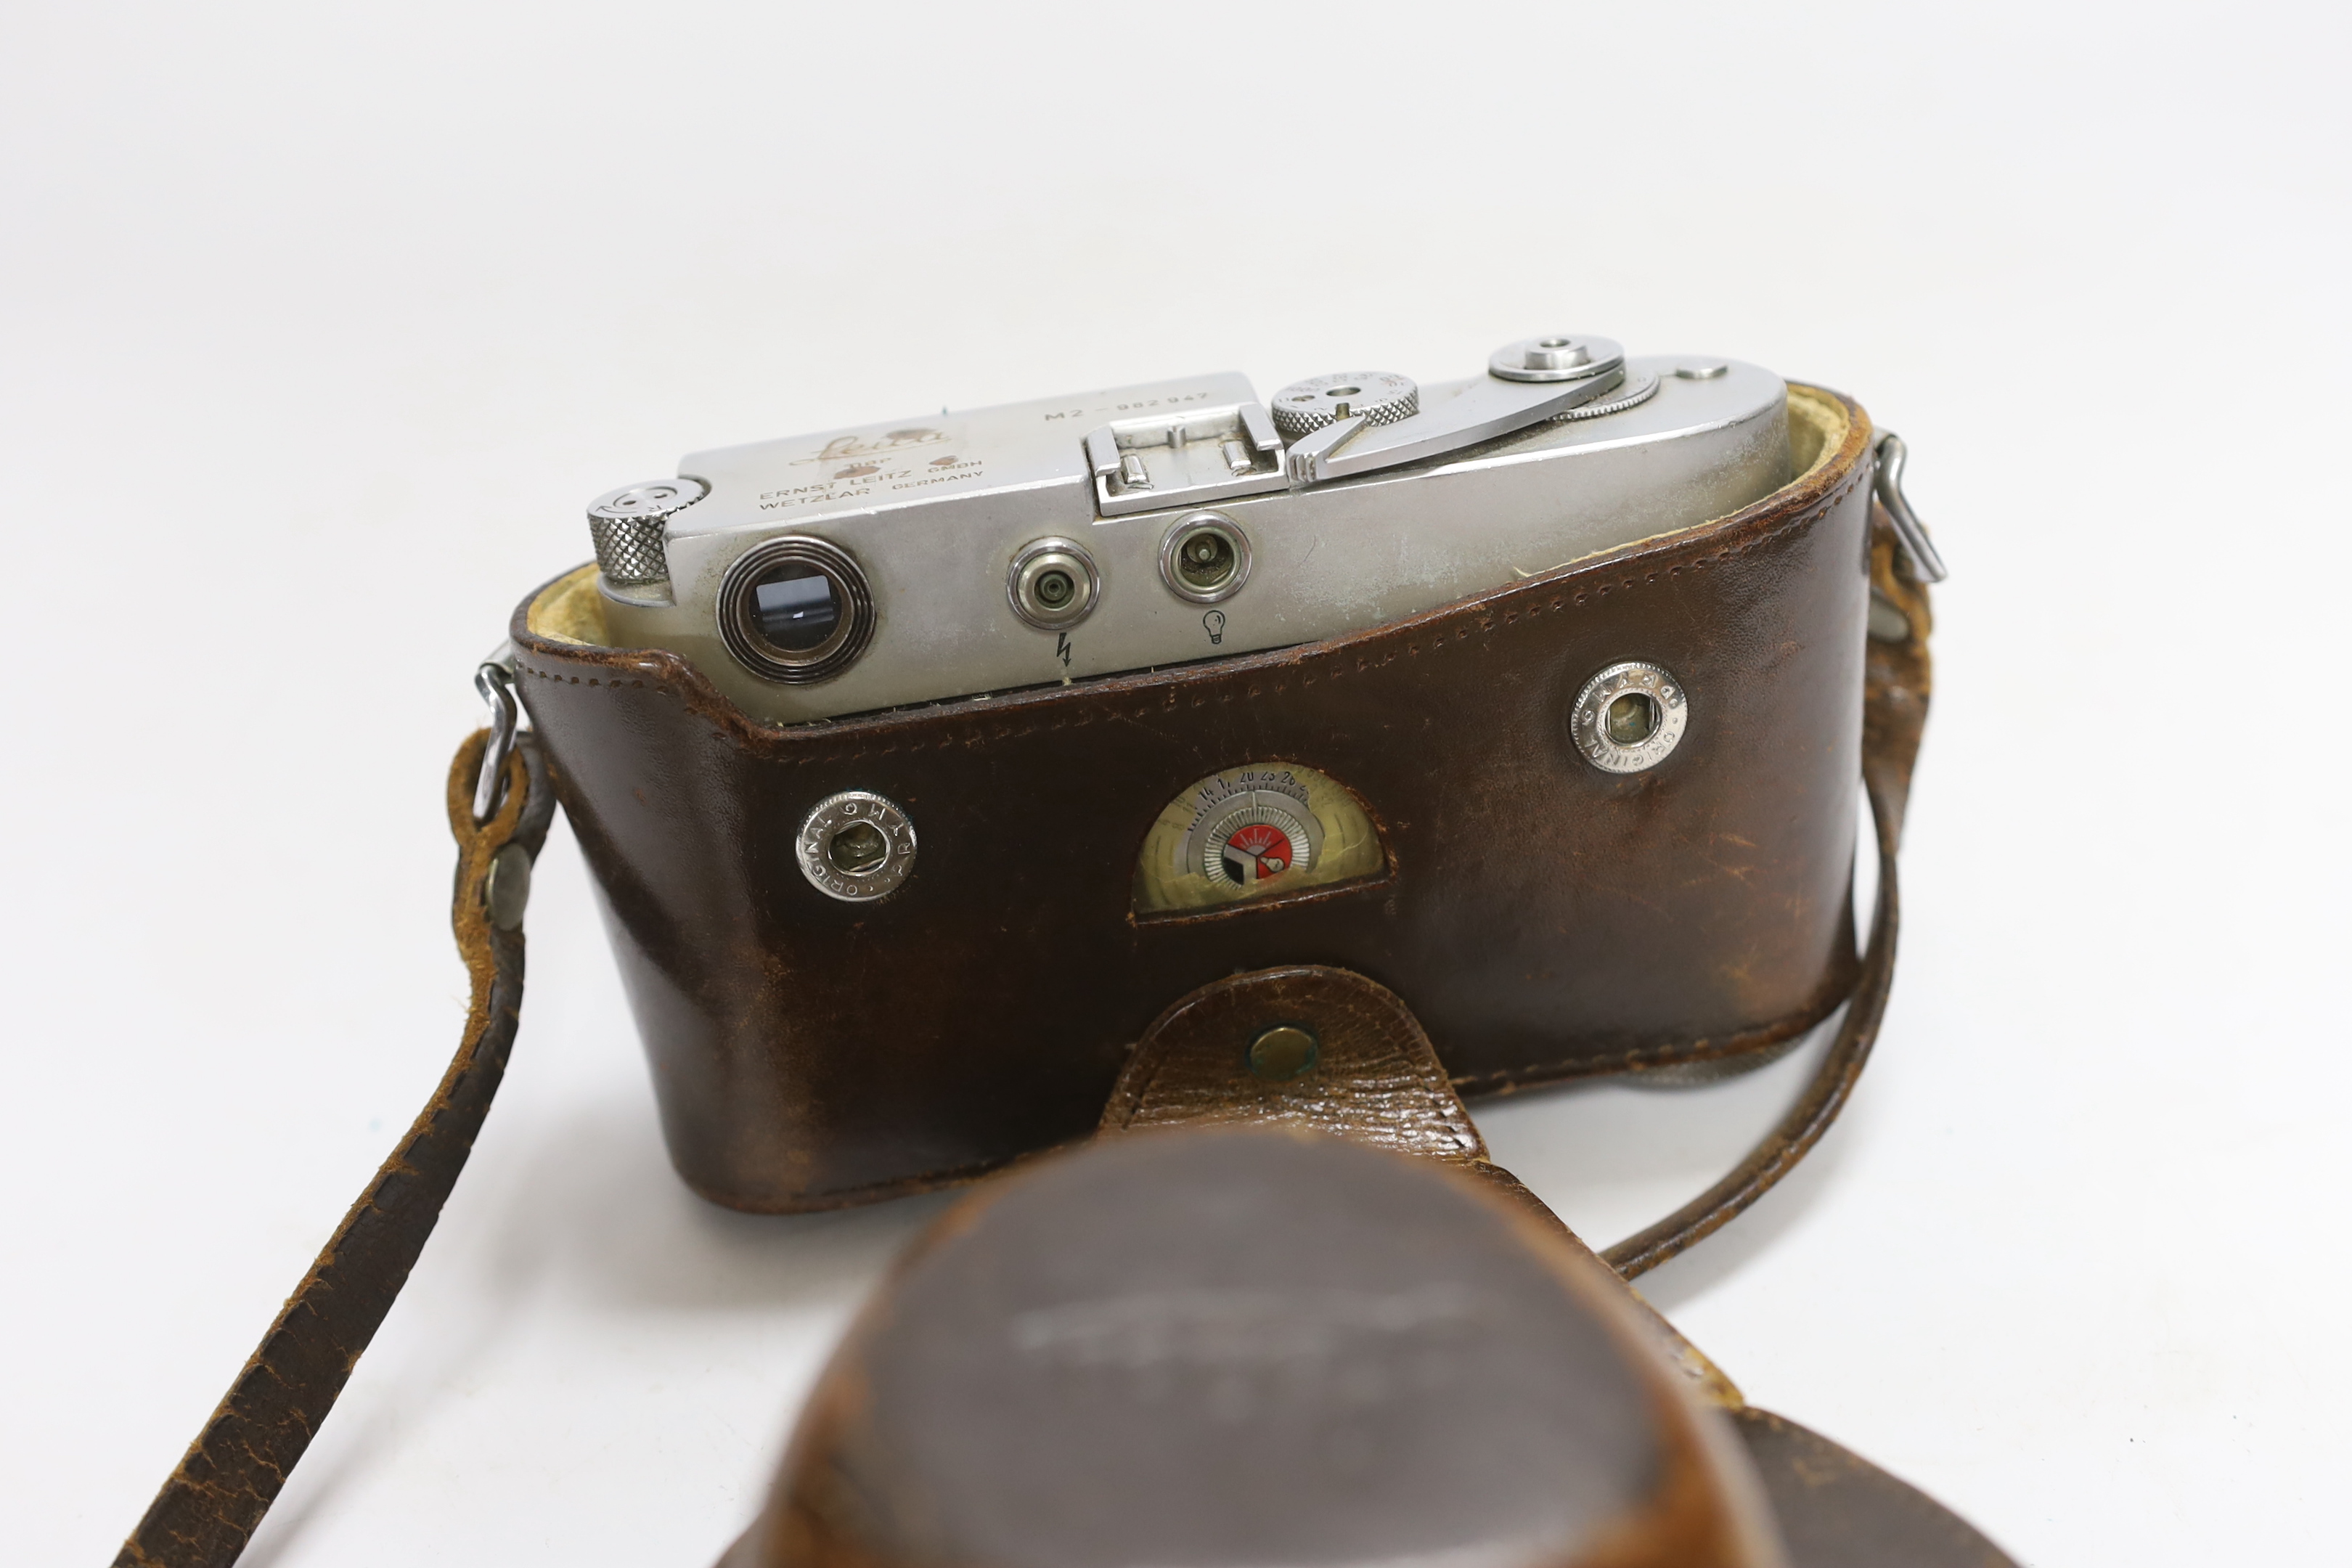 A Leica M2 camera, serial no. 982947, c. 1959, with Summilux 1:1. 4/50 lens, in leather case with strap